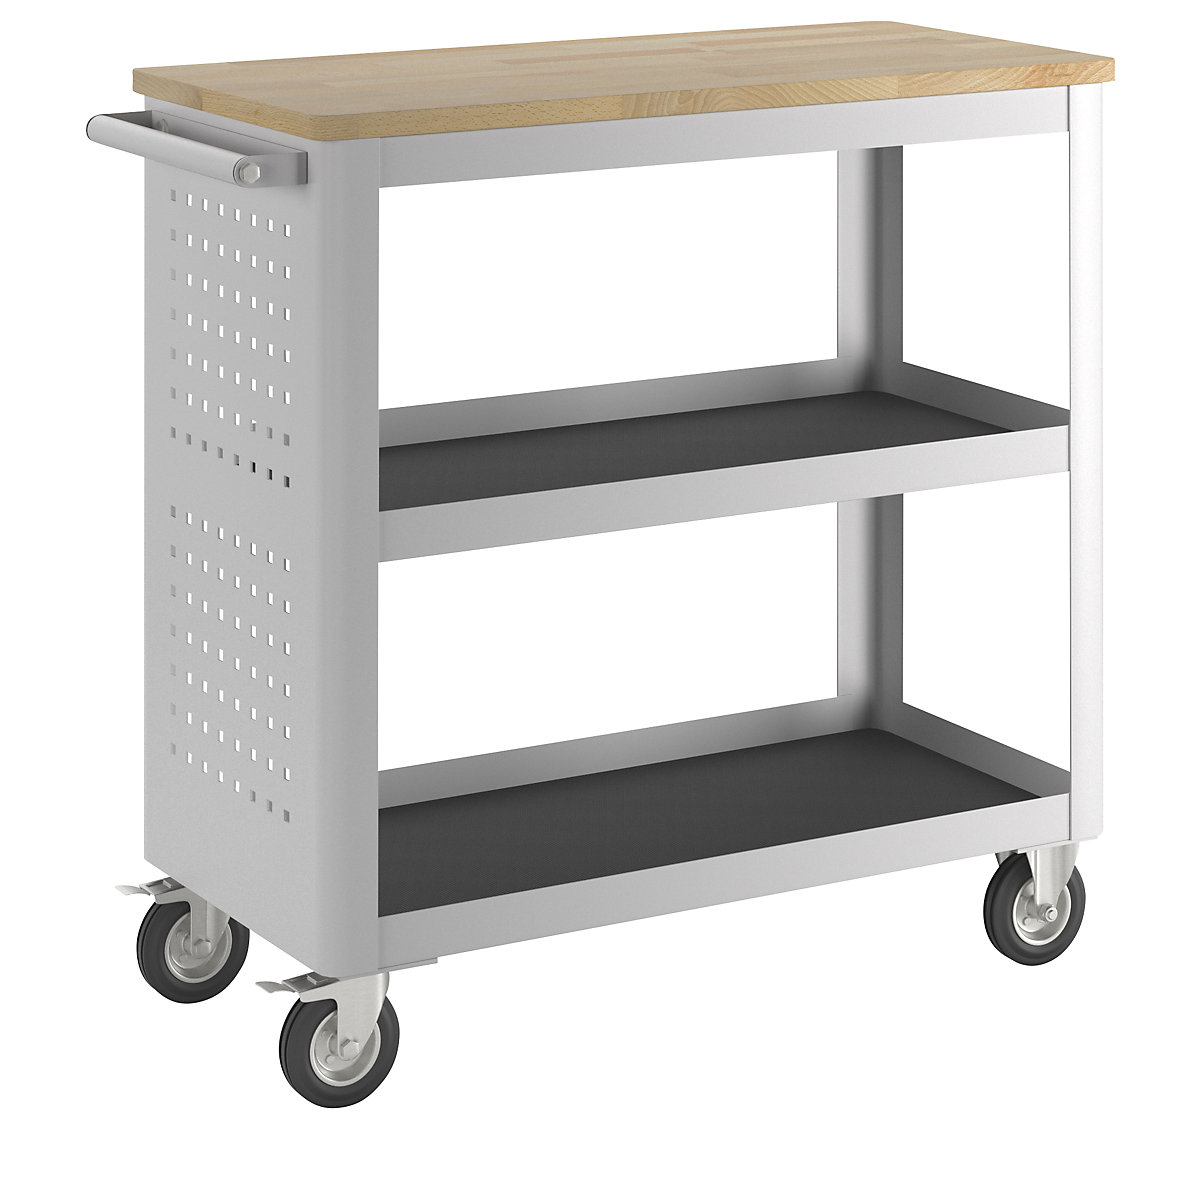 Assembly trolley